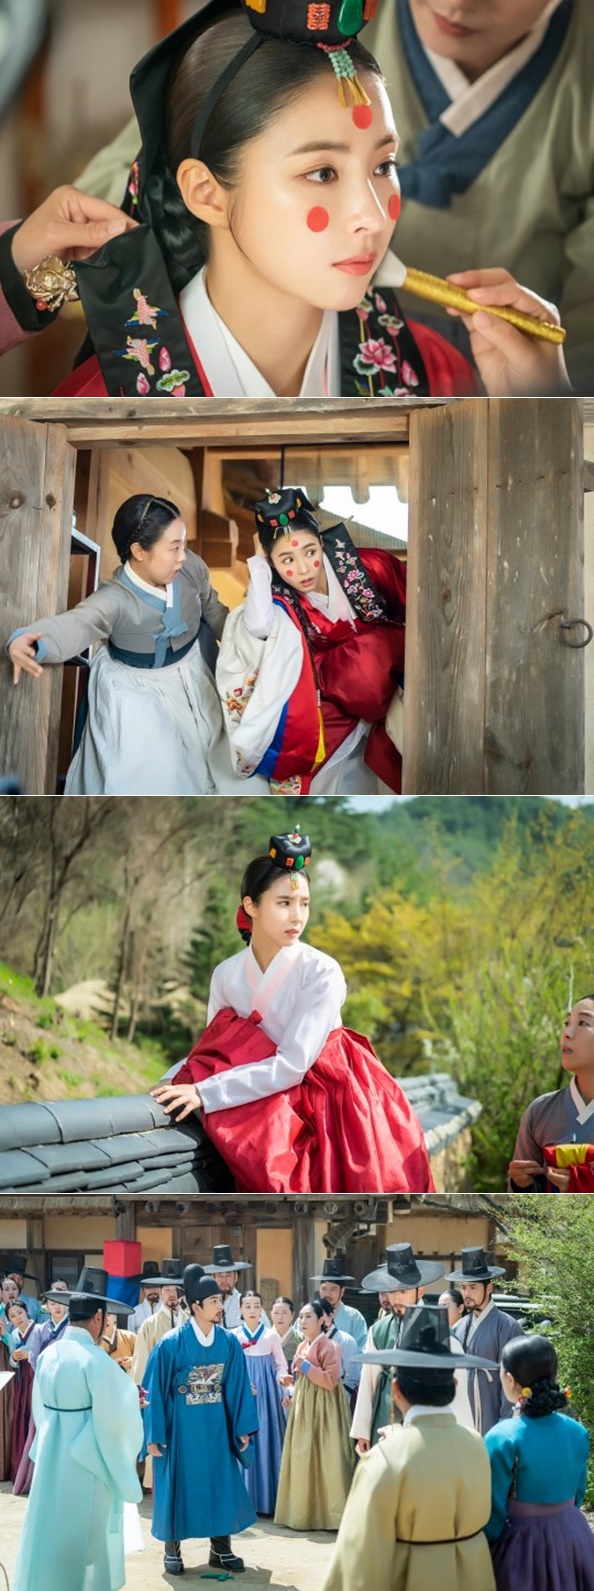 The wedding ceremony of the new employee, Na Hae-ryung, Shin Se-kyung, will be held.She was in the midst of preparing for the wedding ceremony, and she was caught on the wall with only her feet on it.MBCs tree drama Na Hae-ryung (played by Kim Ho-soo, directed by Kang Il-soo, Han Hyun-hee, produced Green Snake Media) unveiled a steel featuring the appearance of Koo Hae-ryung (Shin Se-kyung), who is trying to make an Esapce ahead of the wedding ceremony on the 18th.Na Hae-ryung, starring Shin Se-kyung, Cha Eun-woo, and Park Ki-woong, is the first problematic woman (Na Hae-ryung) of Joseon and the full romance of the Phil by Prince Lee Rim (Cha Eun-woo), the anti-war mother.Lee Ji-hoon, Park Ji-hyun and other young actors, Kim Ji-jin, Kim Min-sang, Choi Duk-moon, and Sung Ji-ru.In the photo, Na Hae-ryung, who is dressed as a bride, was shown.Na Hae-ryung, who finished the new bride visual with a patriarchy and traditional wedding dress, is dressed with a soulless look rather than a happy smile.Na Hae-ryung is then moving in secret with the help of the somatoma Sulgeum (brewed mother).Her head is sneaking out of the back door, not the wedding ceremony, and she wonders what the two are up to.Especially, Na Hae-ryung, who threw off his wedding dress, is attracted to the attention because he is hesitant just before he jumps on the wall.She adds curiosity about why she is trying to get out of the wedding ceremony and what she is hesitating about.Finally, the wedding ceremony, which became a mess, is open to the public.Lee Seung-hoon (Seo Young-joo), who wore a private mother and wore a blue wedding dress, and Koo Jae-kyung (Fairy Hwan), the brother of Na Hae-ryung, are both shocked and unable to speak.Na Hae-ryung is running a lifetime of Esapce Operations ahead of the wedding ceremony, said the new employee, Na Hae-ryung.I hope you can check on the show today (on the 18th) to see if her operations will succeed and what results will be.Shin Se-kyung, Cha Eun-woo and Park Ki-woong will appear in the new officer Na Hae-ryung, which will air 3-4 times at 8:55 p.m. today (18th).